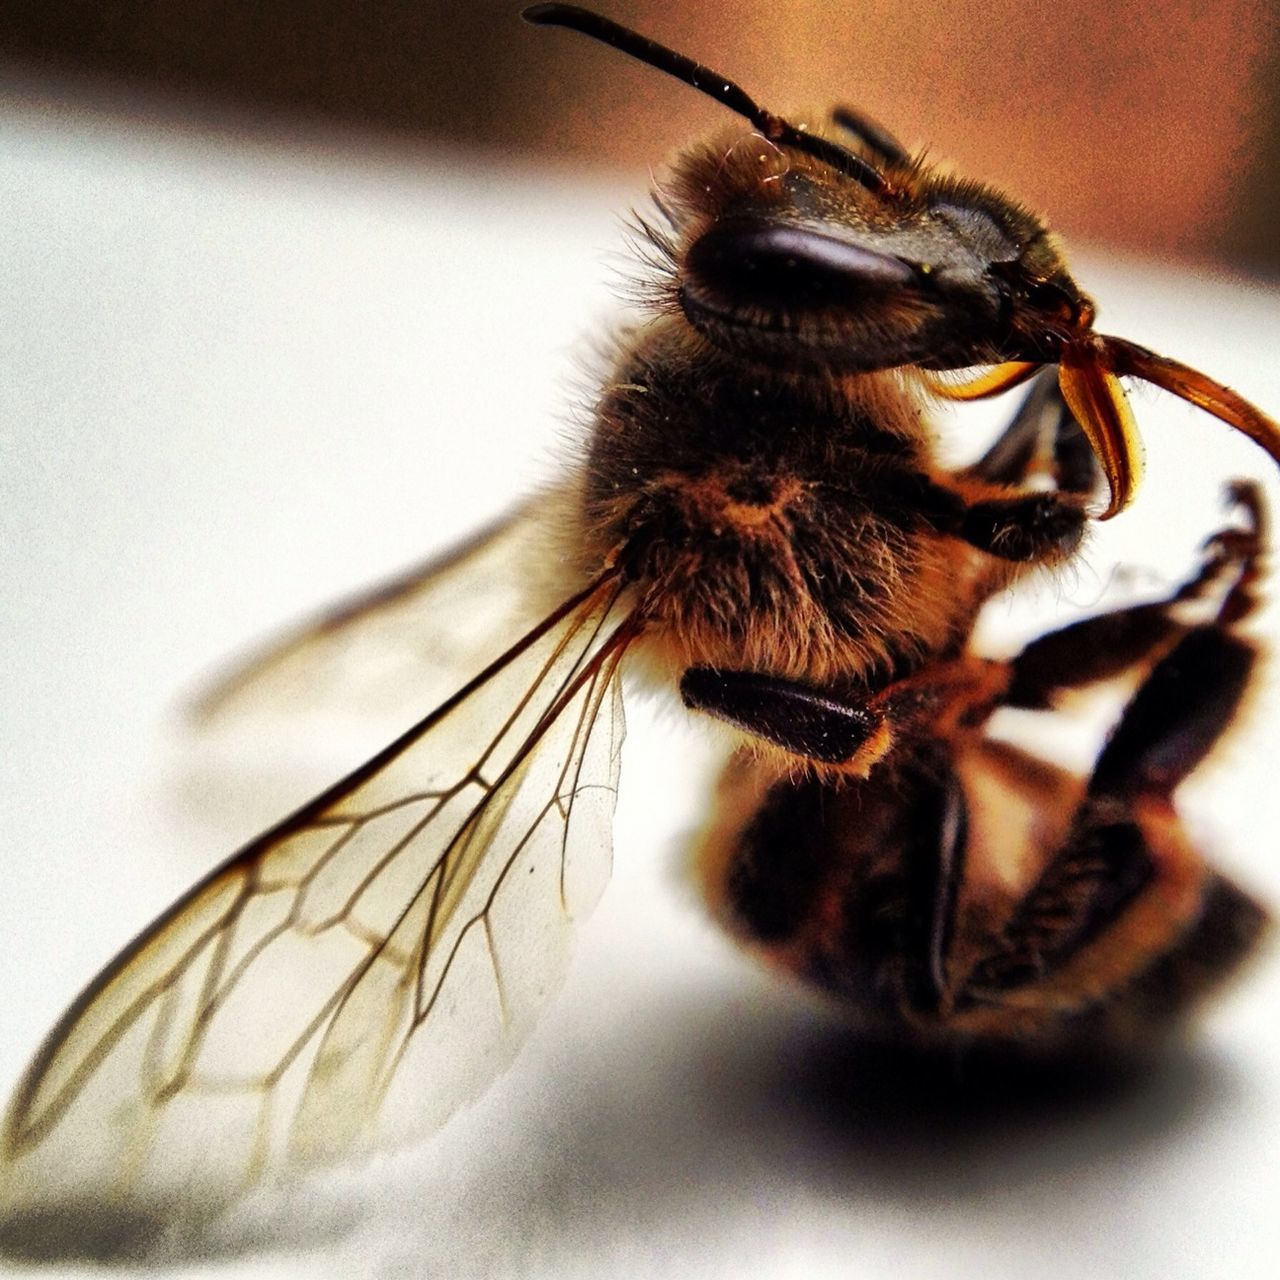 one animal, animal themes, insect, close-up, wildlife, animals in the wild, indoors, animal body part, animal eye, selective focus, animal head, pets, zoology, focus on foreground, domestic animals, no people, brown, bee, extreme close-up, animal antenna